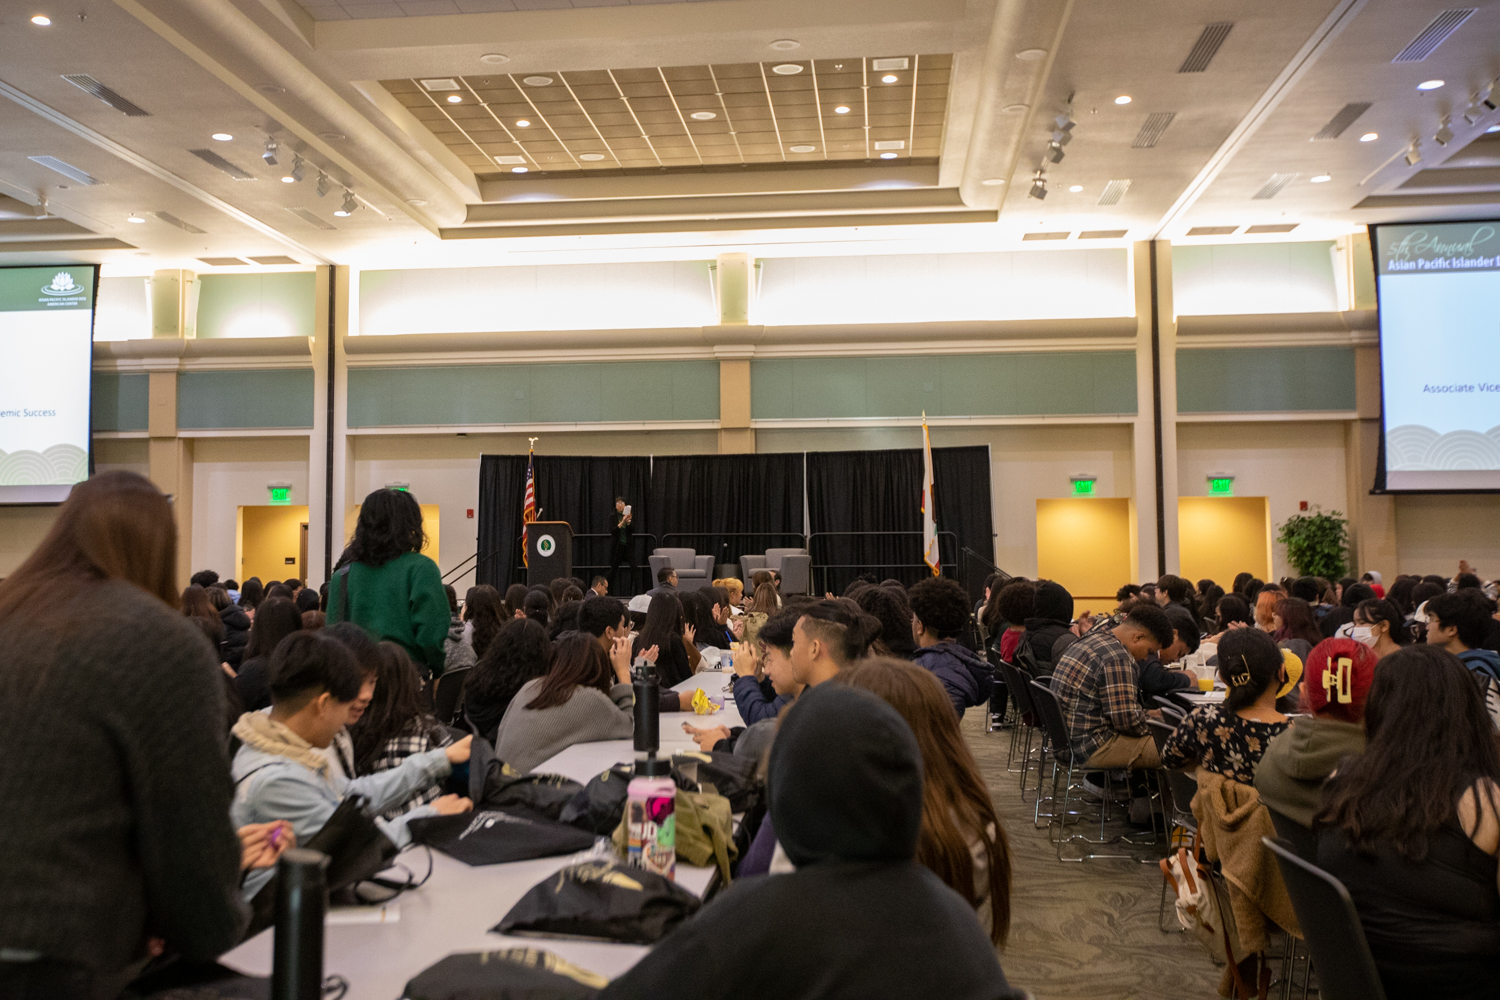 Students at tables in the University Ballroom at Sac State during APIDA College Day.